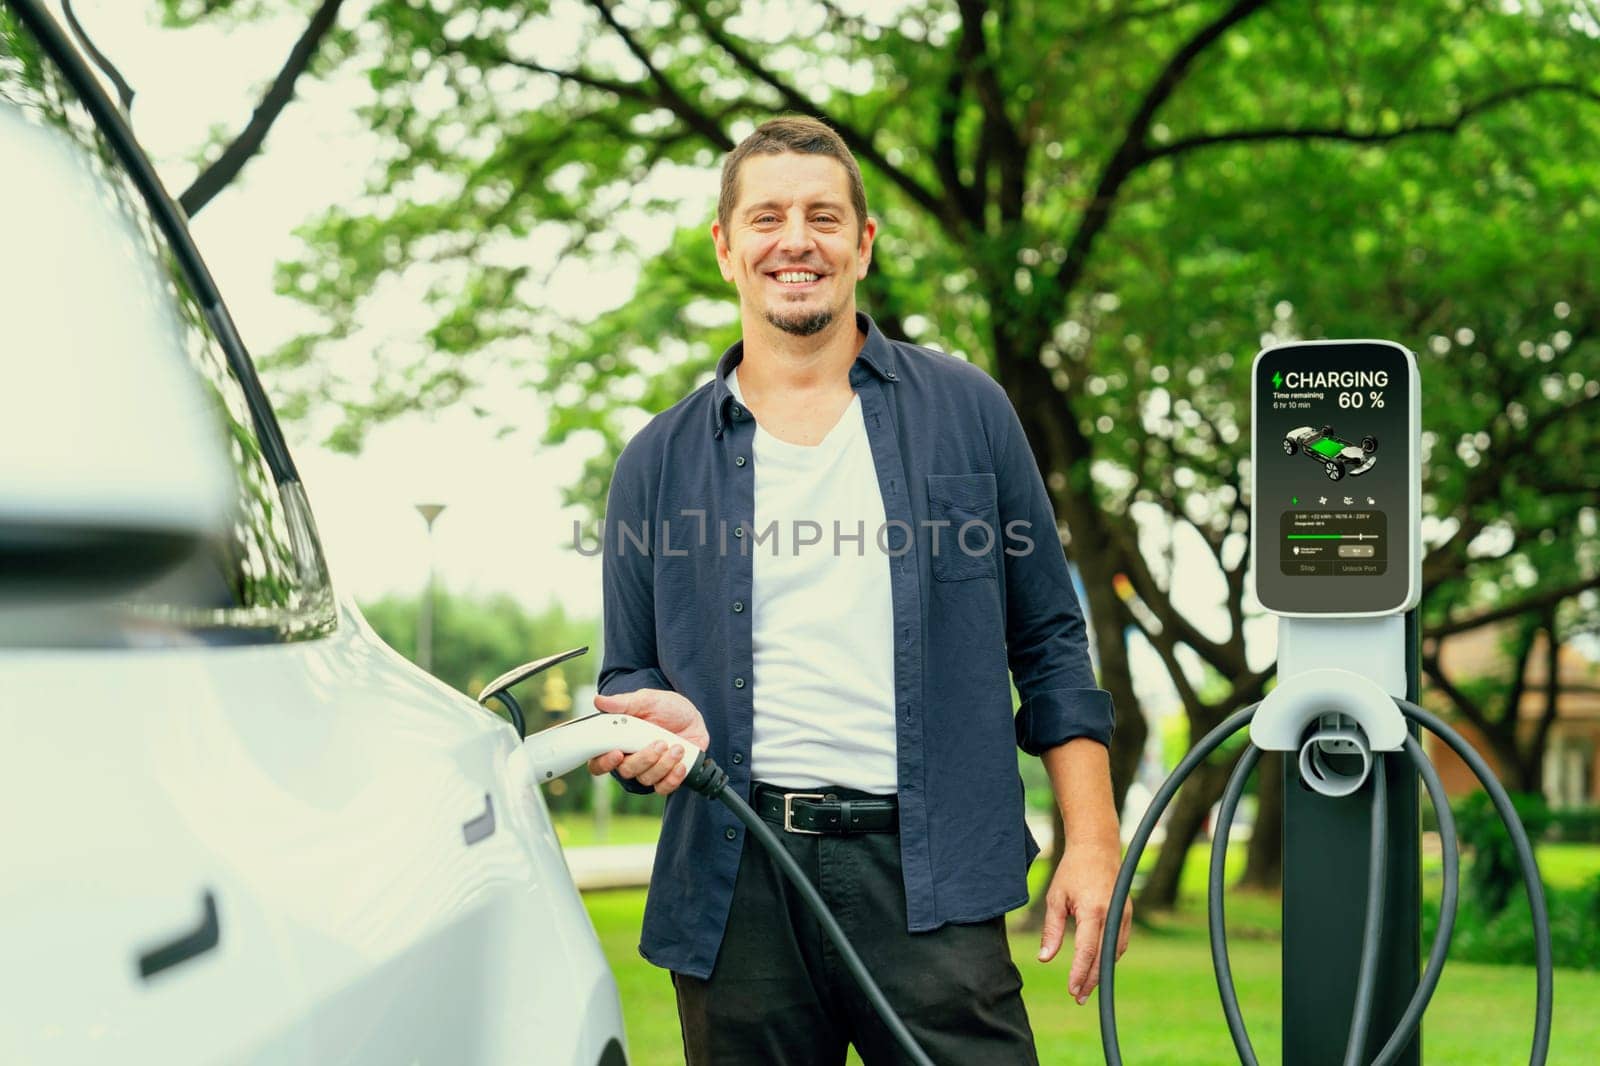 Man recharge EV electric vehicle battery from EV charging station. Exalt by biancoblue